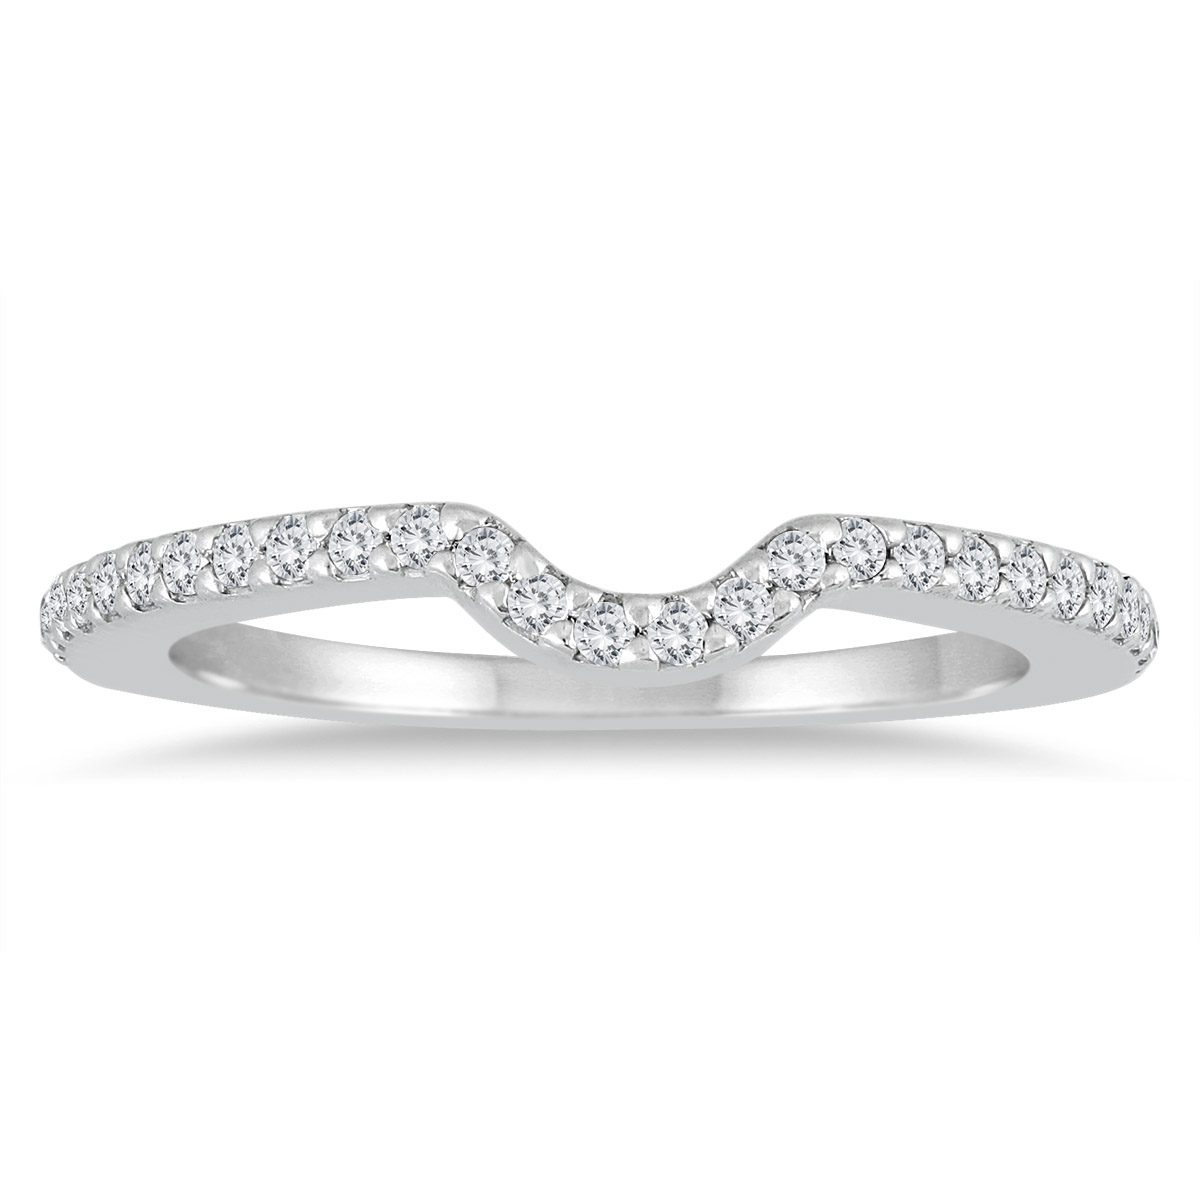 1/4 Carat TW Diamond Curved Wedding Band in 10K White Gold